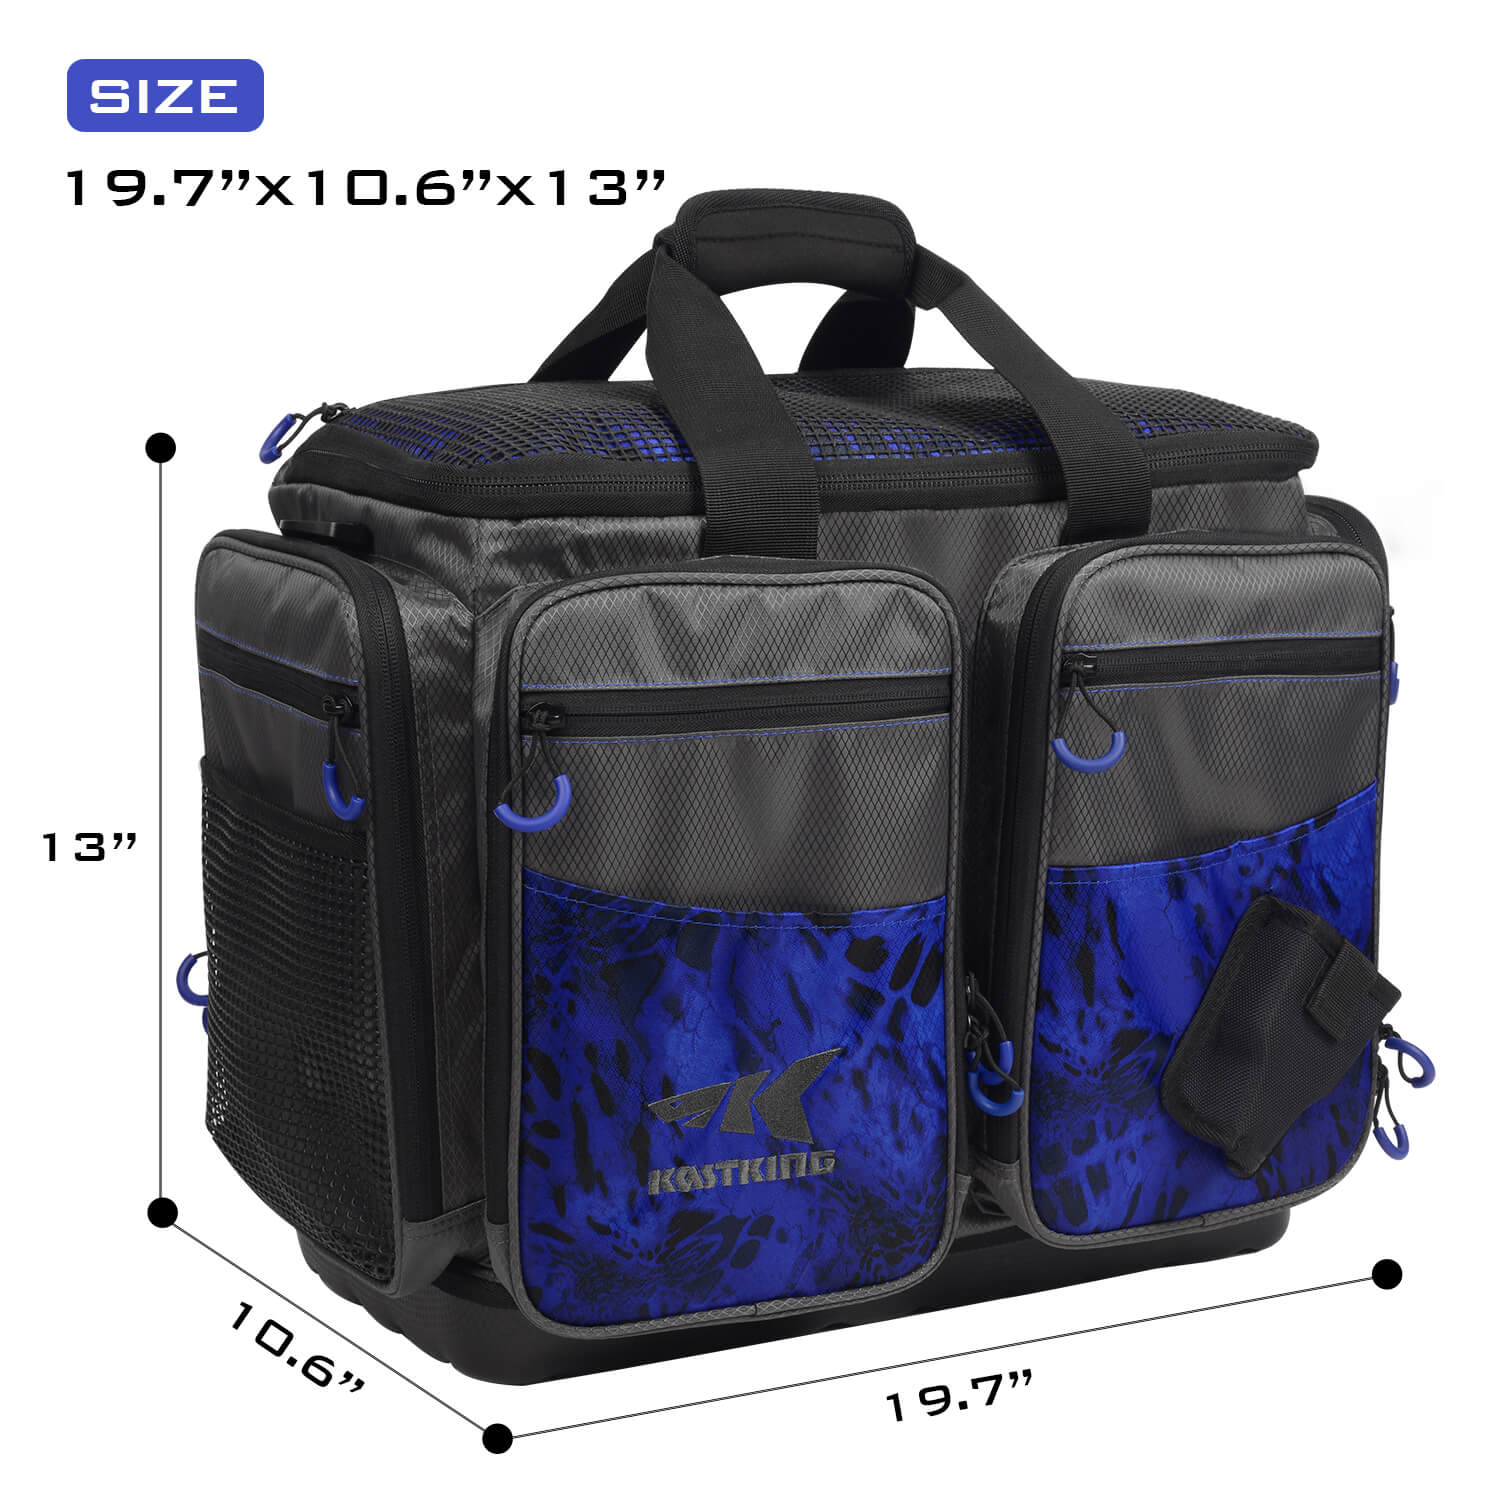 Fishing Tackle Bag Water-Resistant Fishing Lure Reel Storage Bag Fishing Gear Accessories Carry Bag Case, Size: Large